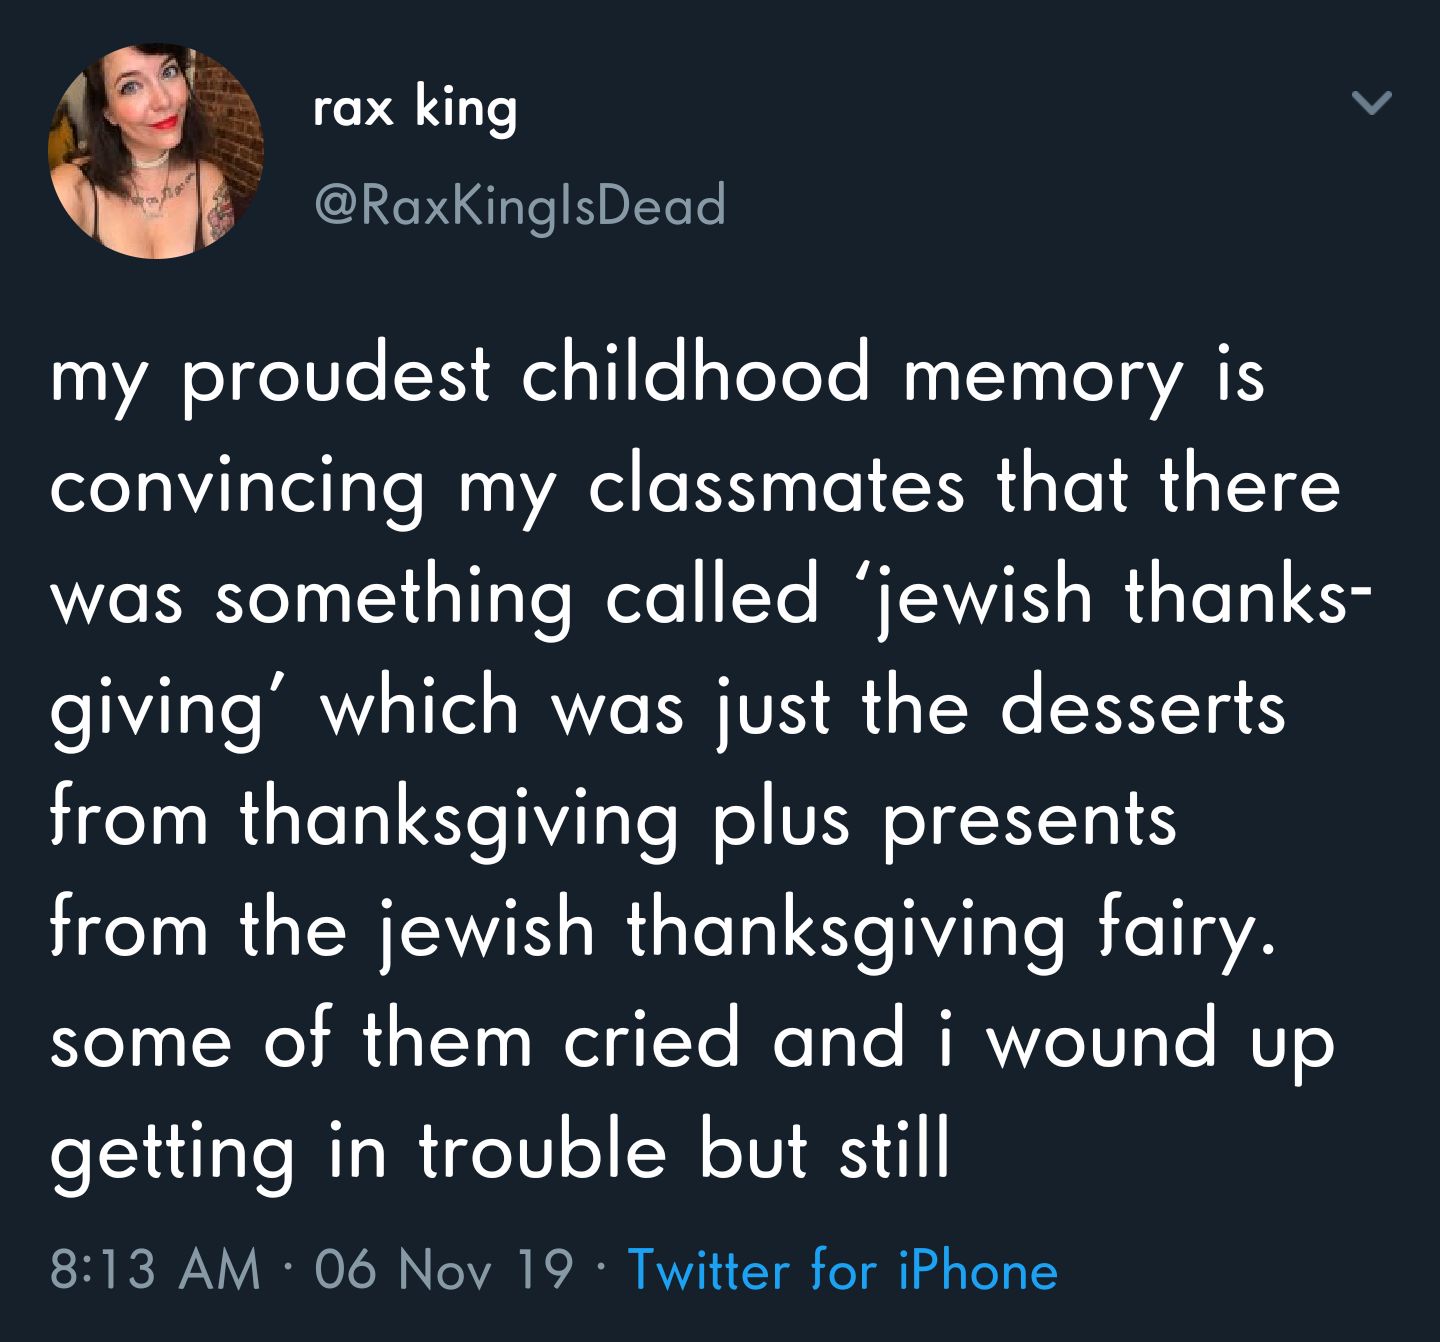 sky - rax king my proudest childhood memory is convincing my classmates that there was something called 'jewish thanks giving' which was just the desserts from thanksgiving plus presents from the jewish thanksgiving fairy. some of them cried and i wound u